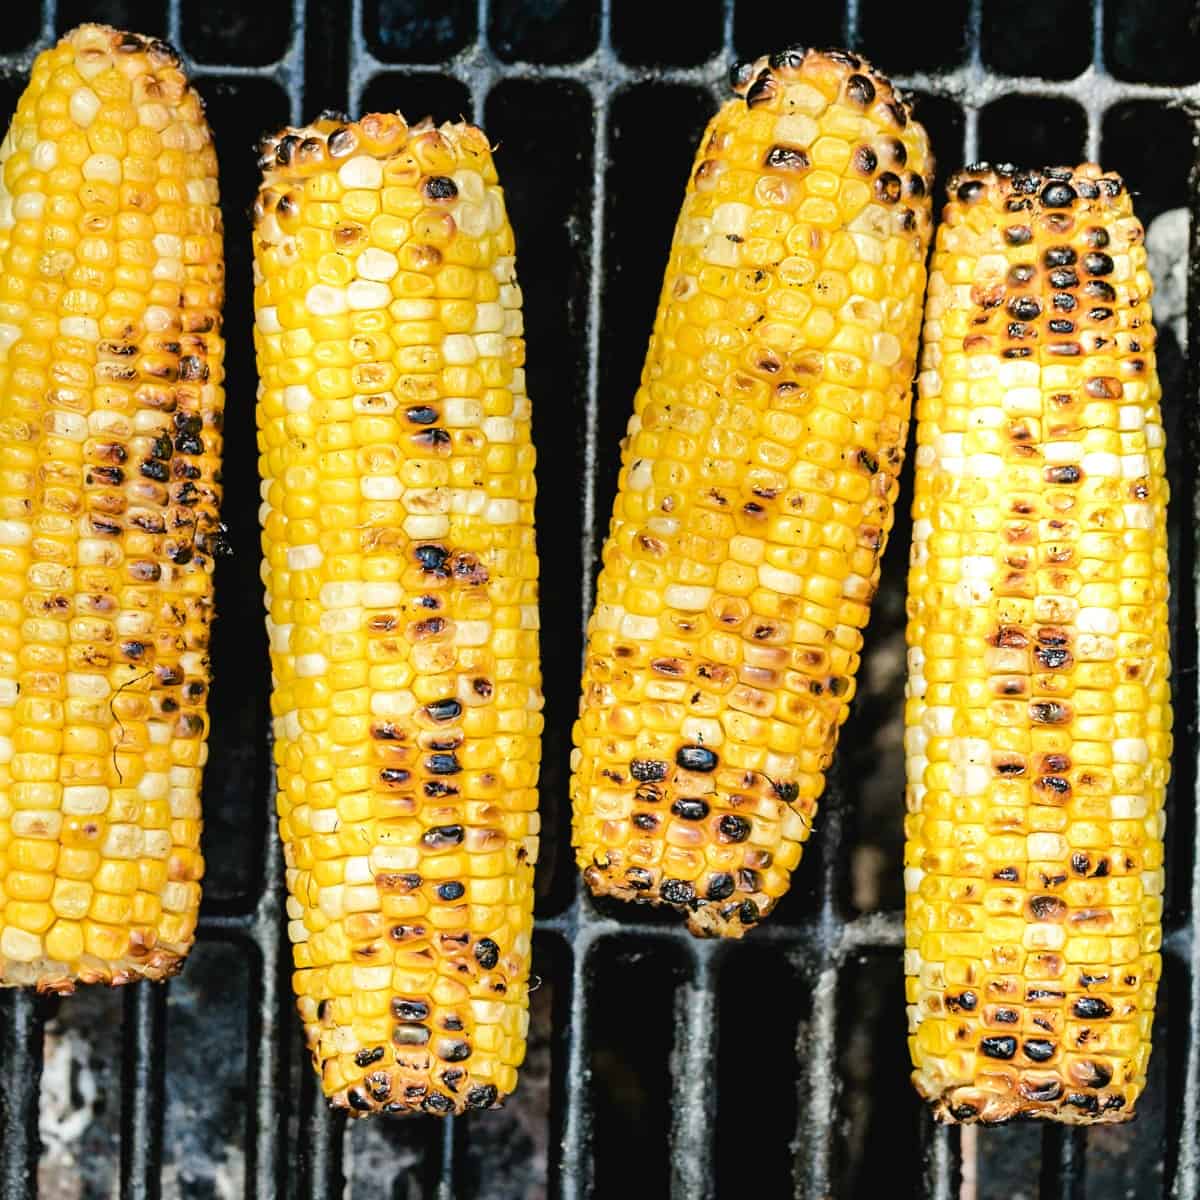 How To Grill Corn On The Cob The Best Corn On The Cob,Patty Pan Squash Varieties